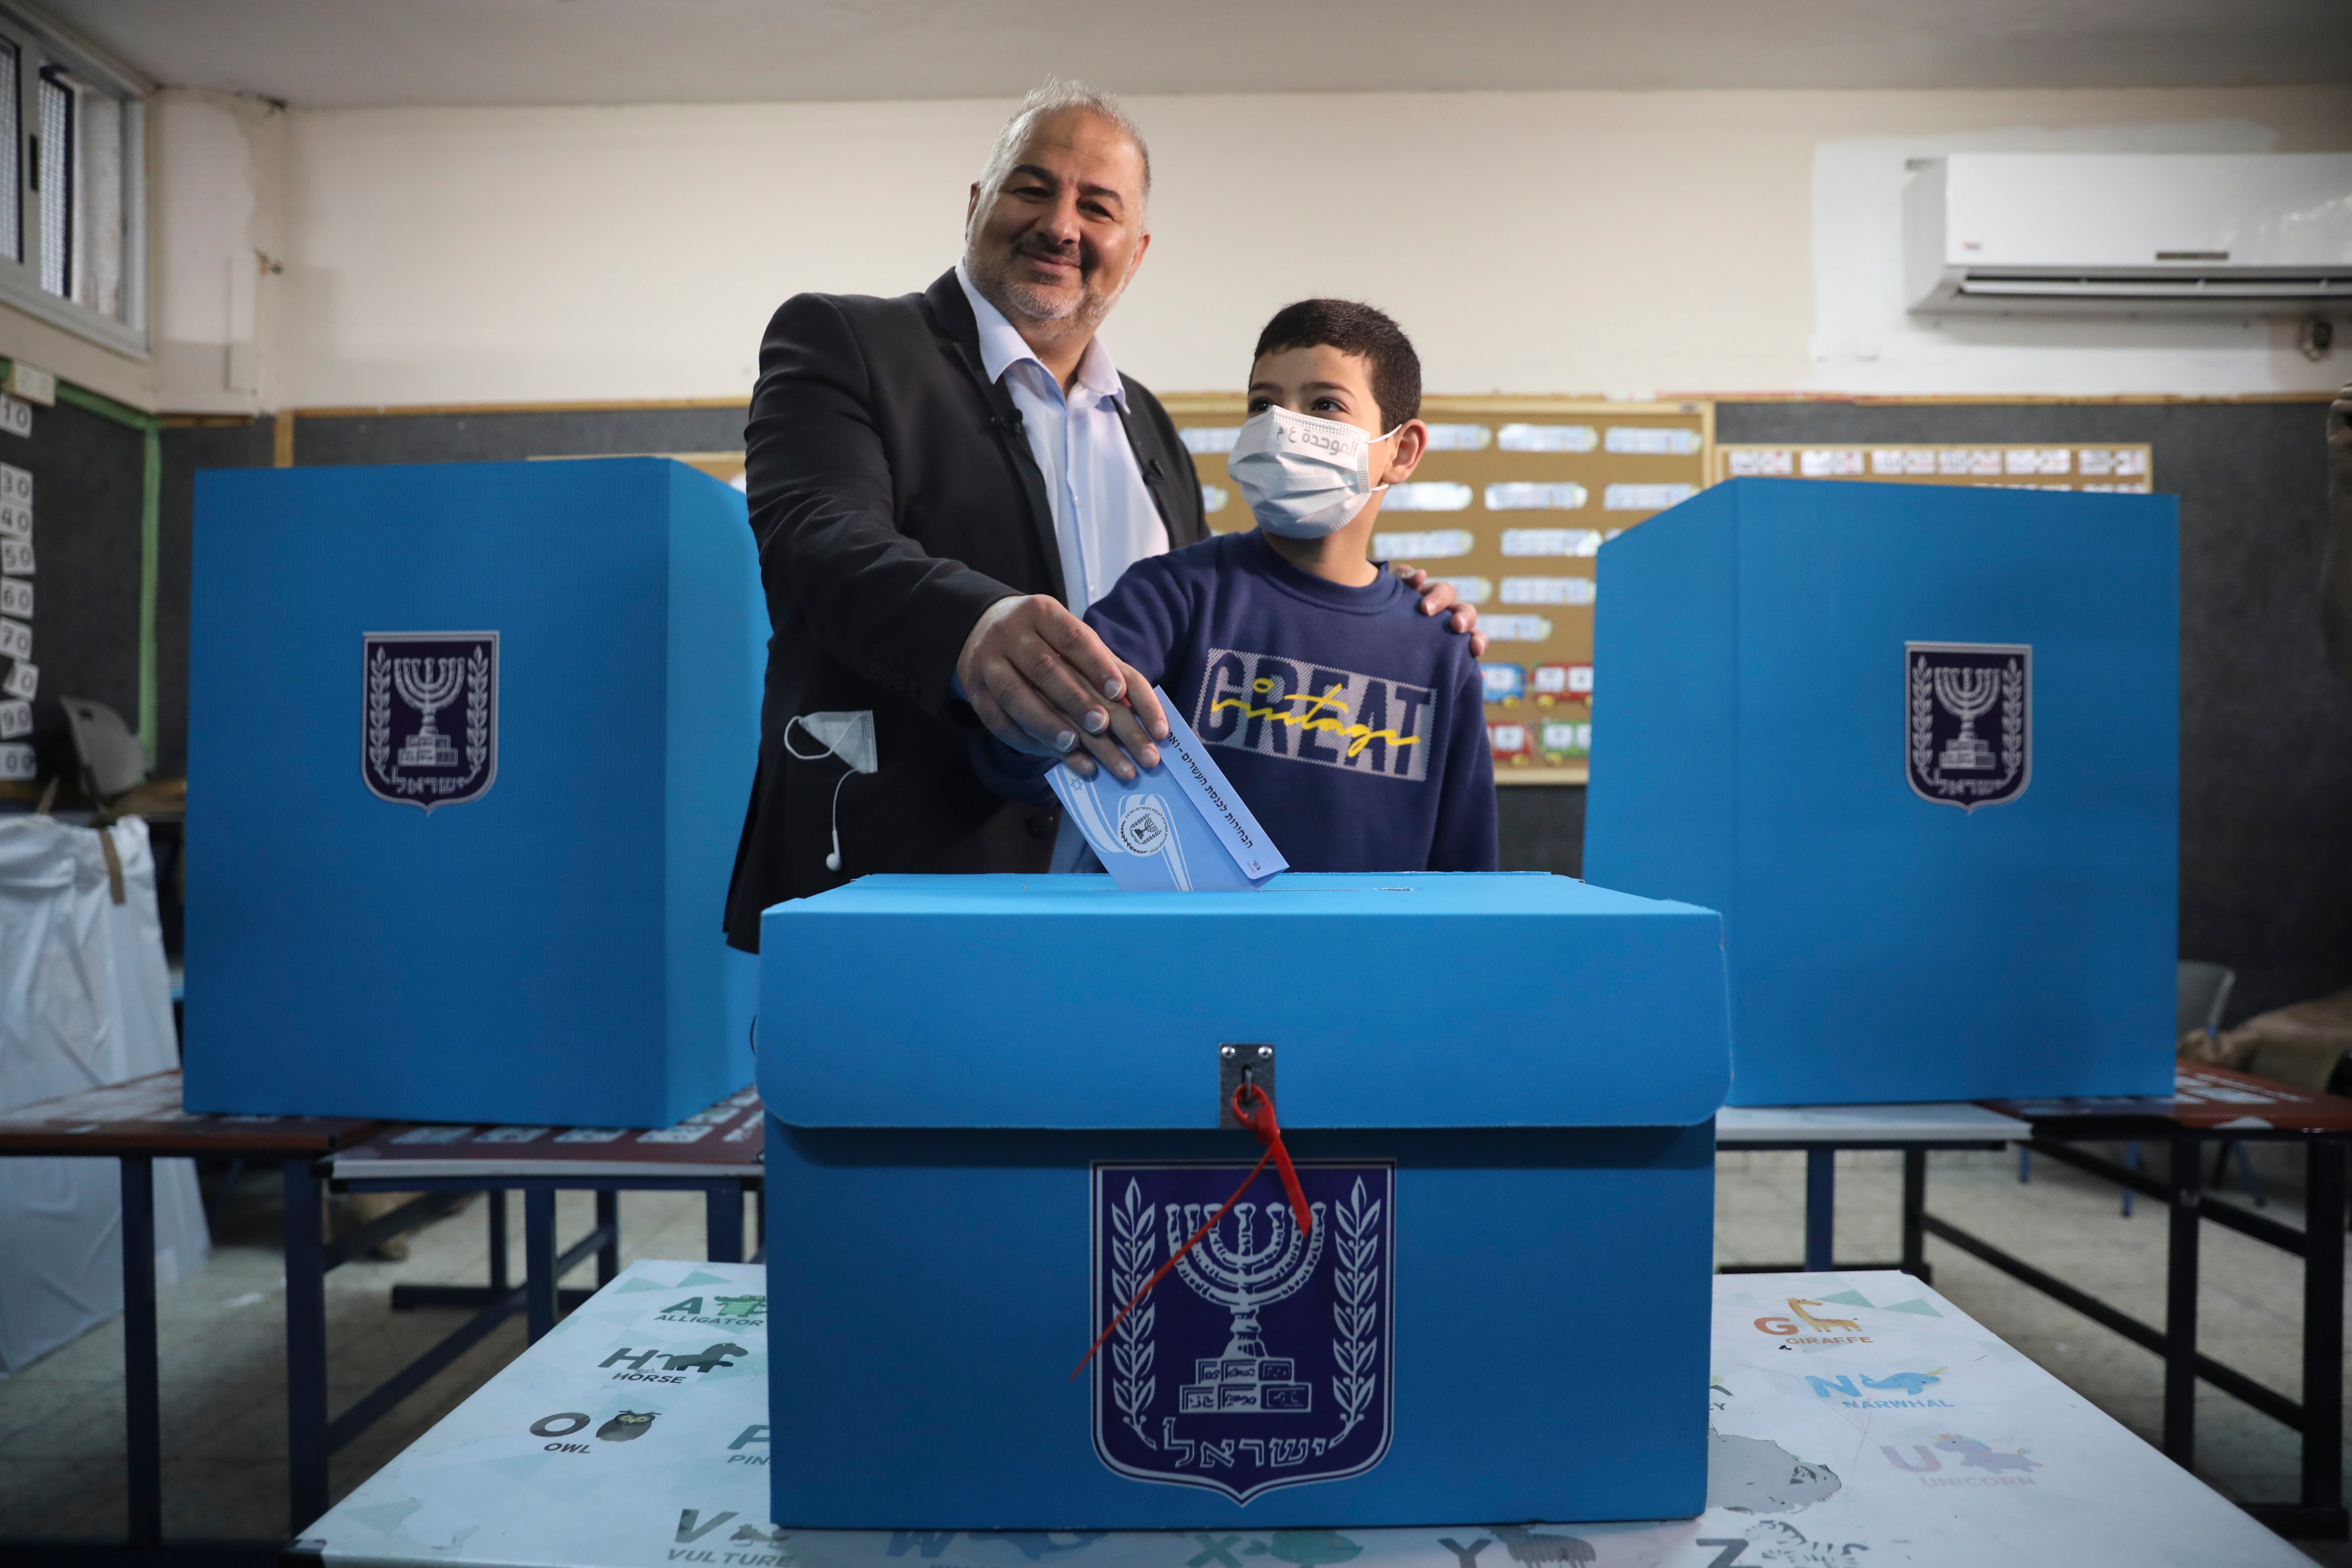 Kingmaker in the making: Mansour Abbas, leader of the United Arab List, votes at a polling station in Maghar, Israel